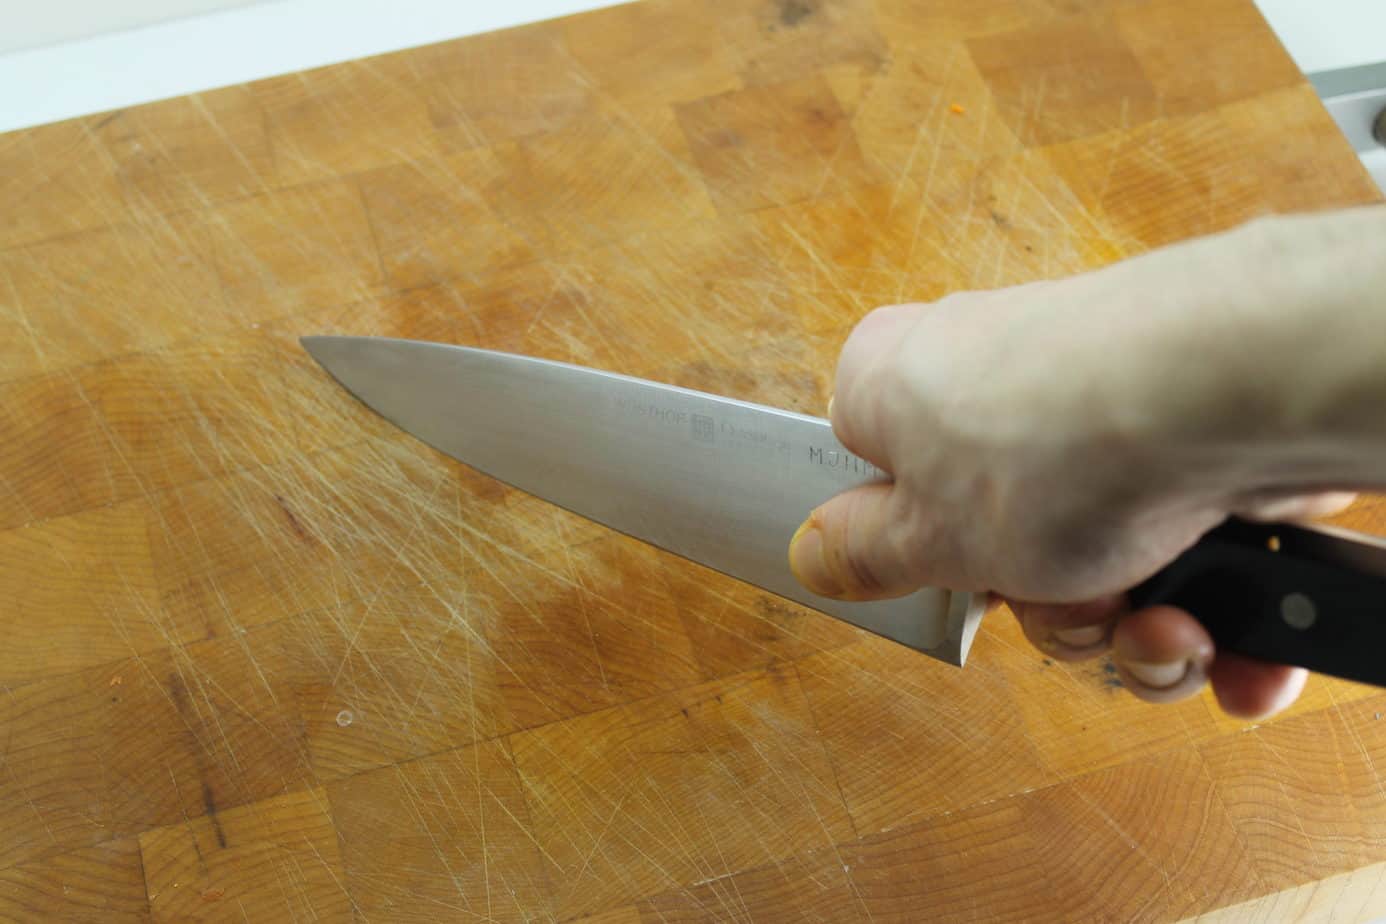 Knife Skills - Grip the knife by the blade to have full control over the knife and be able to guide the blade.